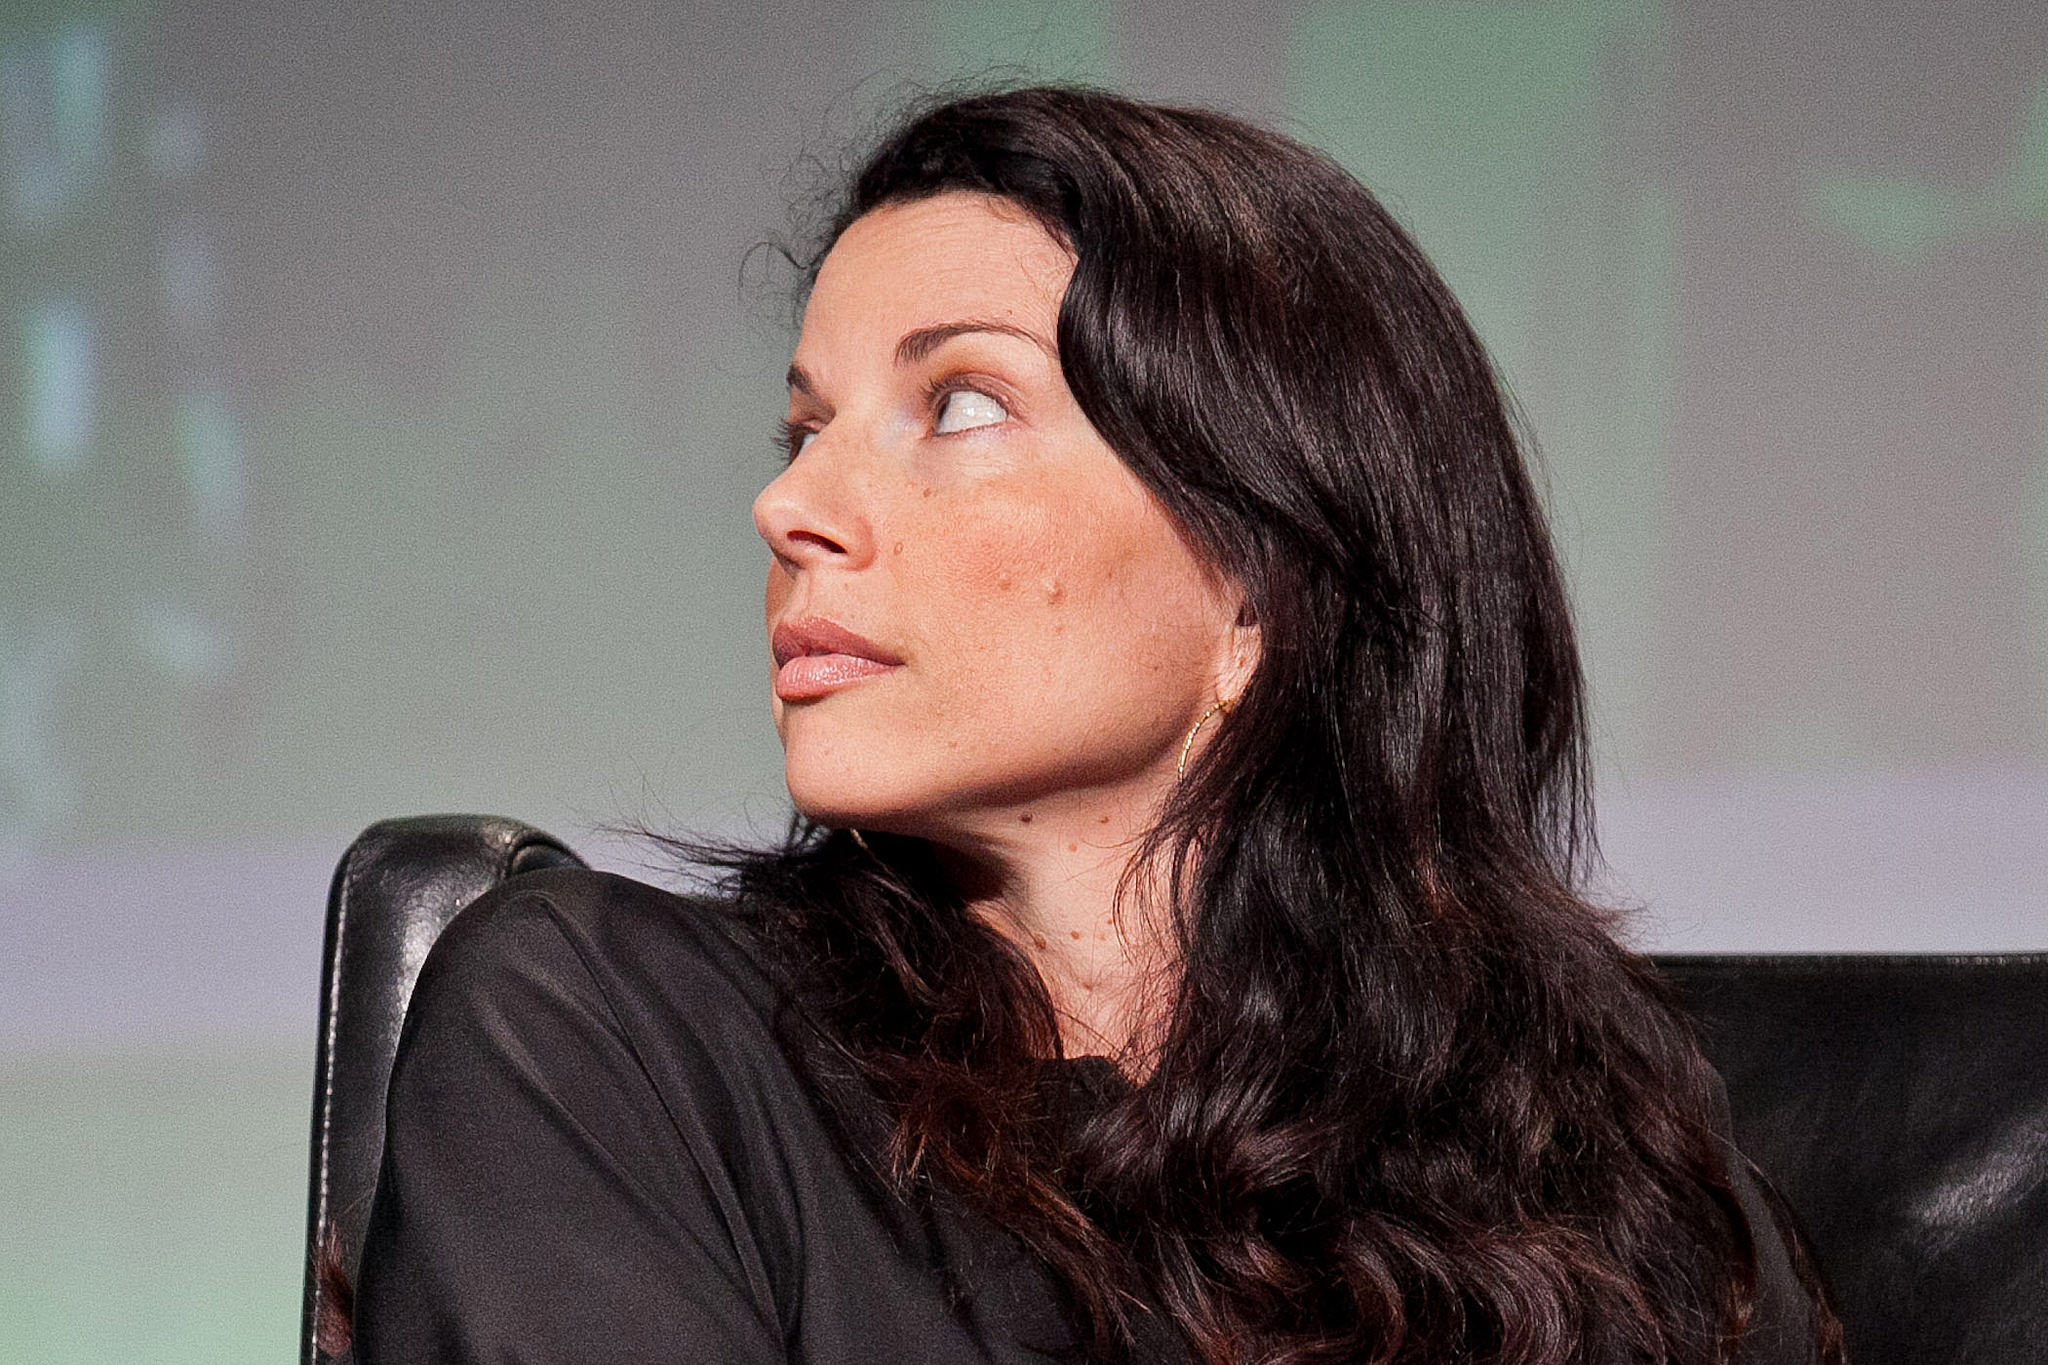 Gina Bianchini, founder and CEO of Mighty, 2012